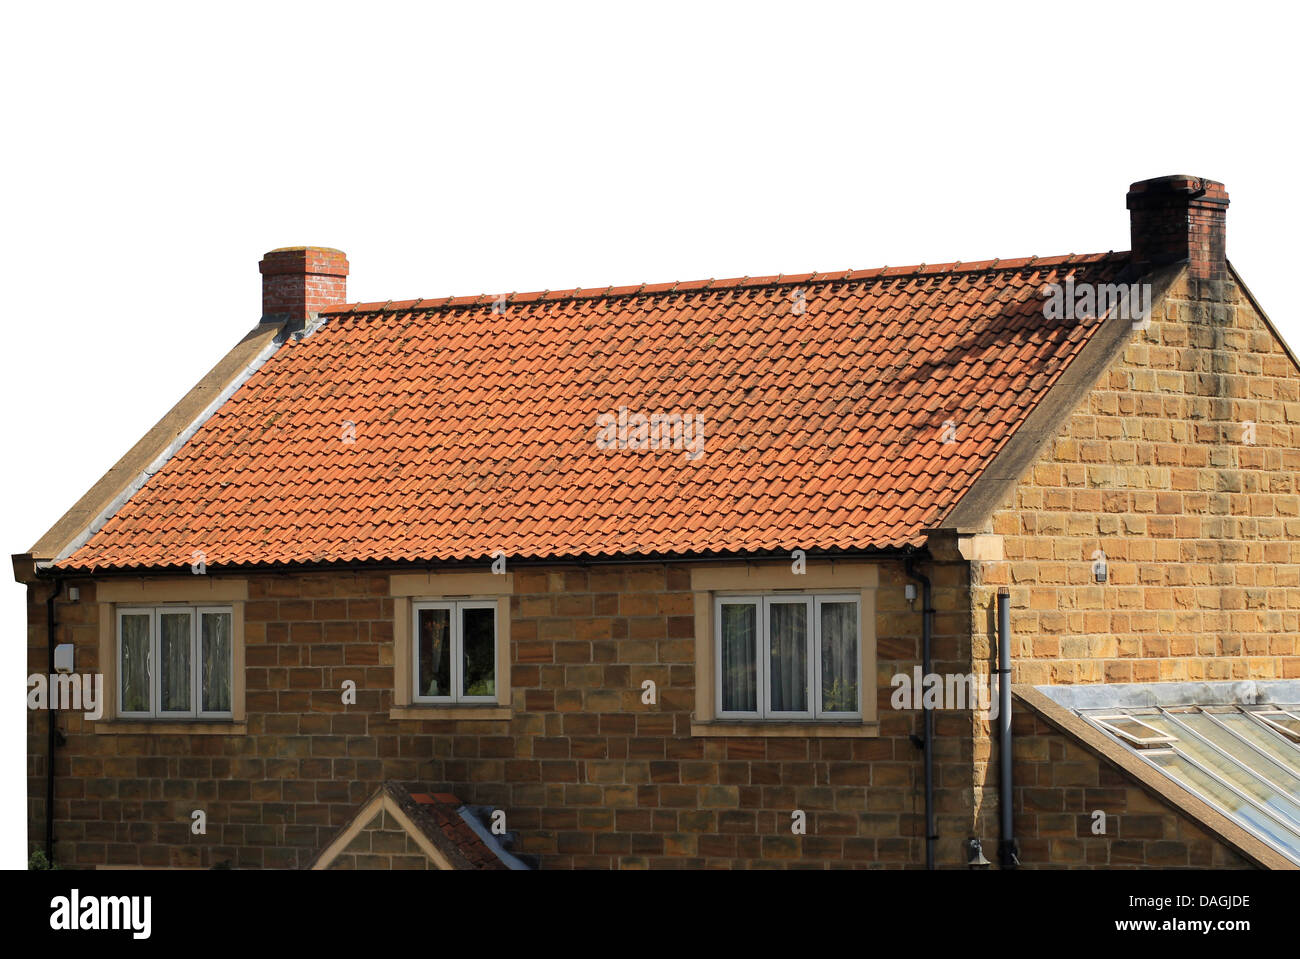 Exterior of brick house with red roof tiles isolated on white background. Stock Photo